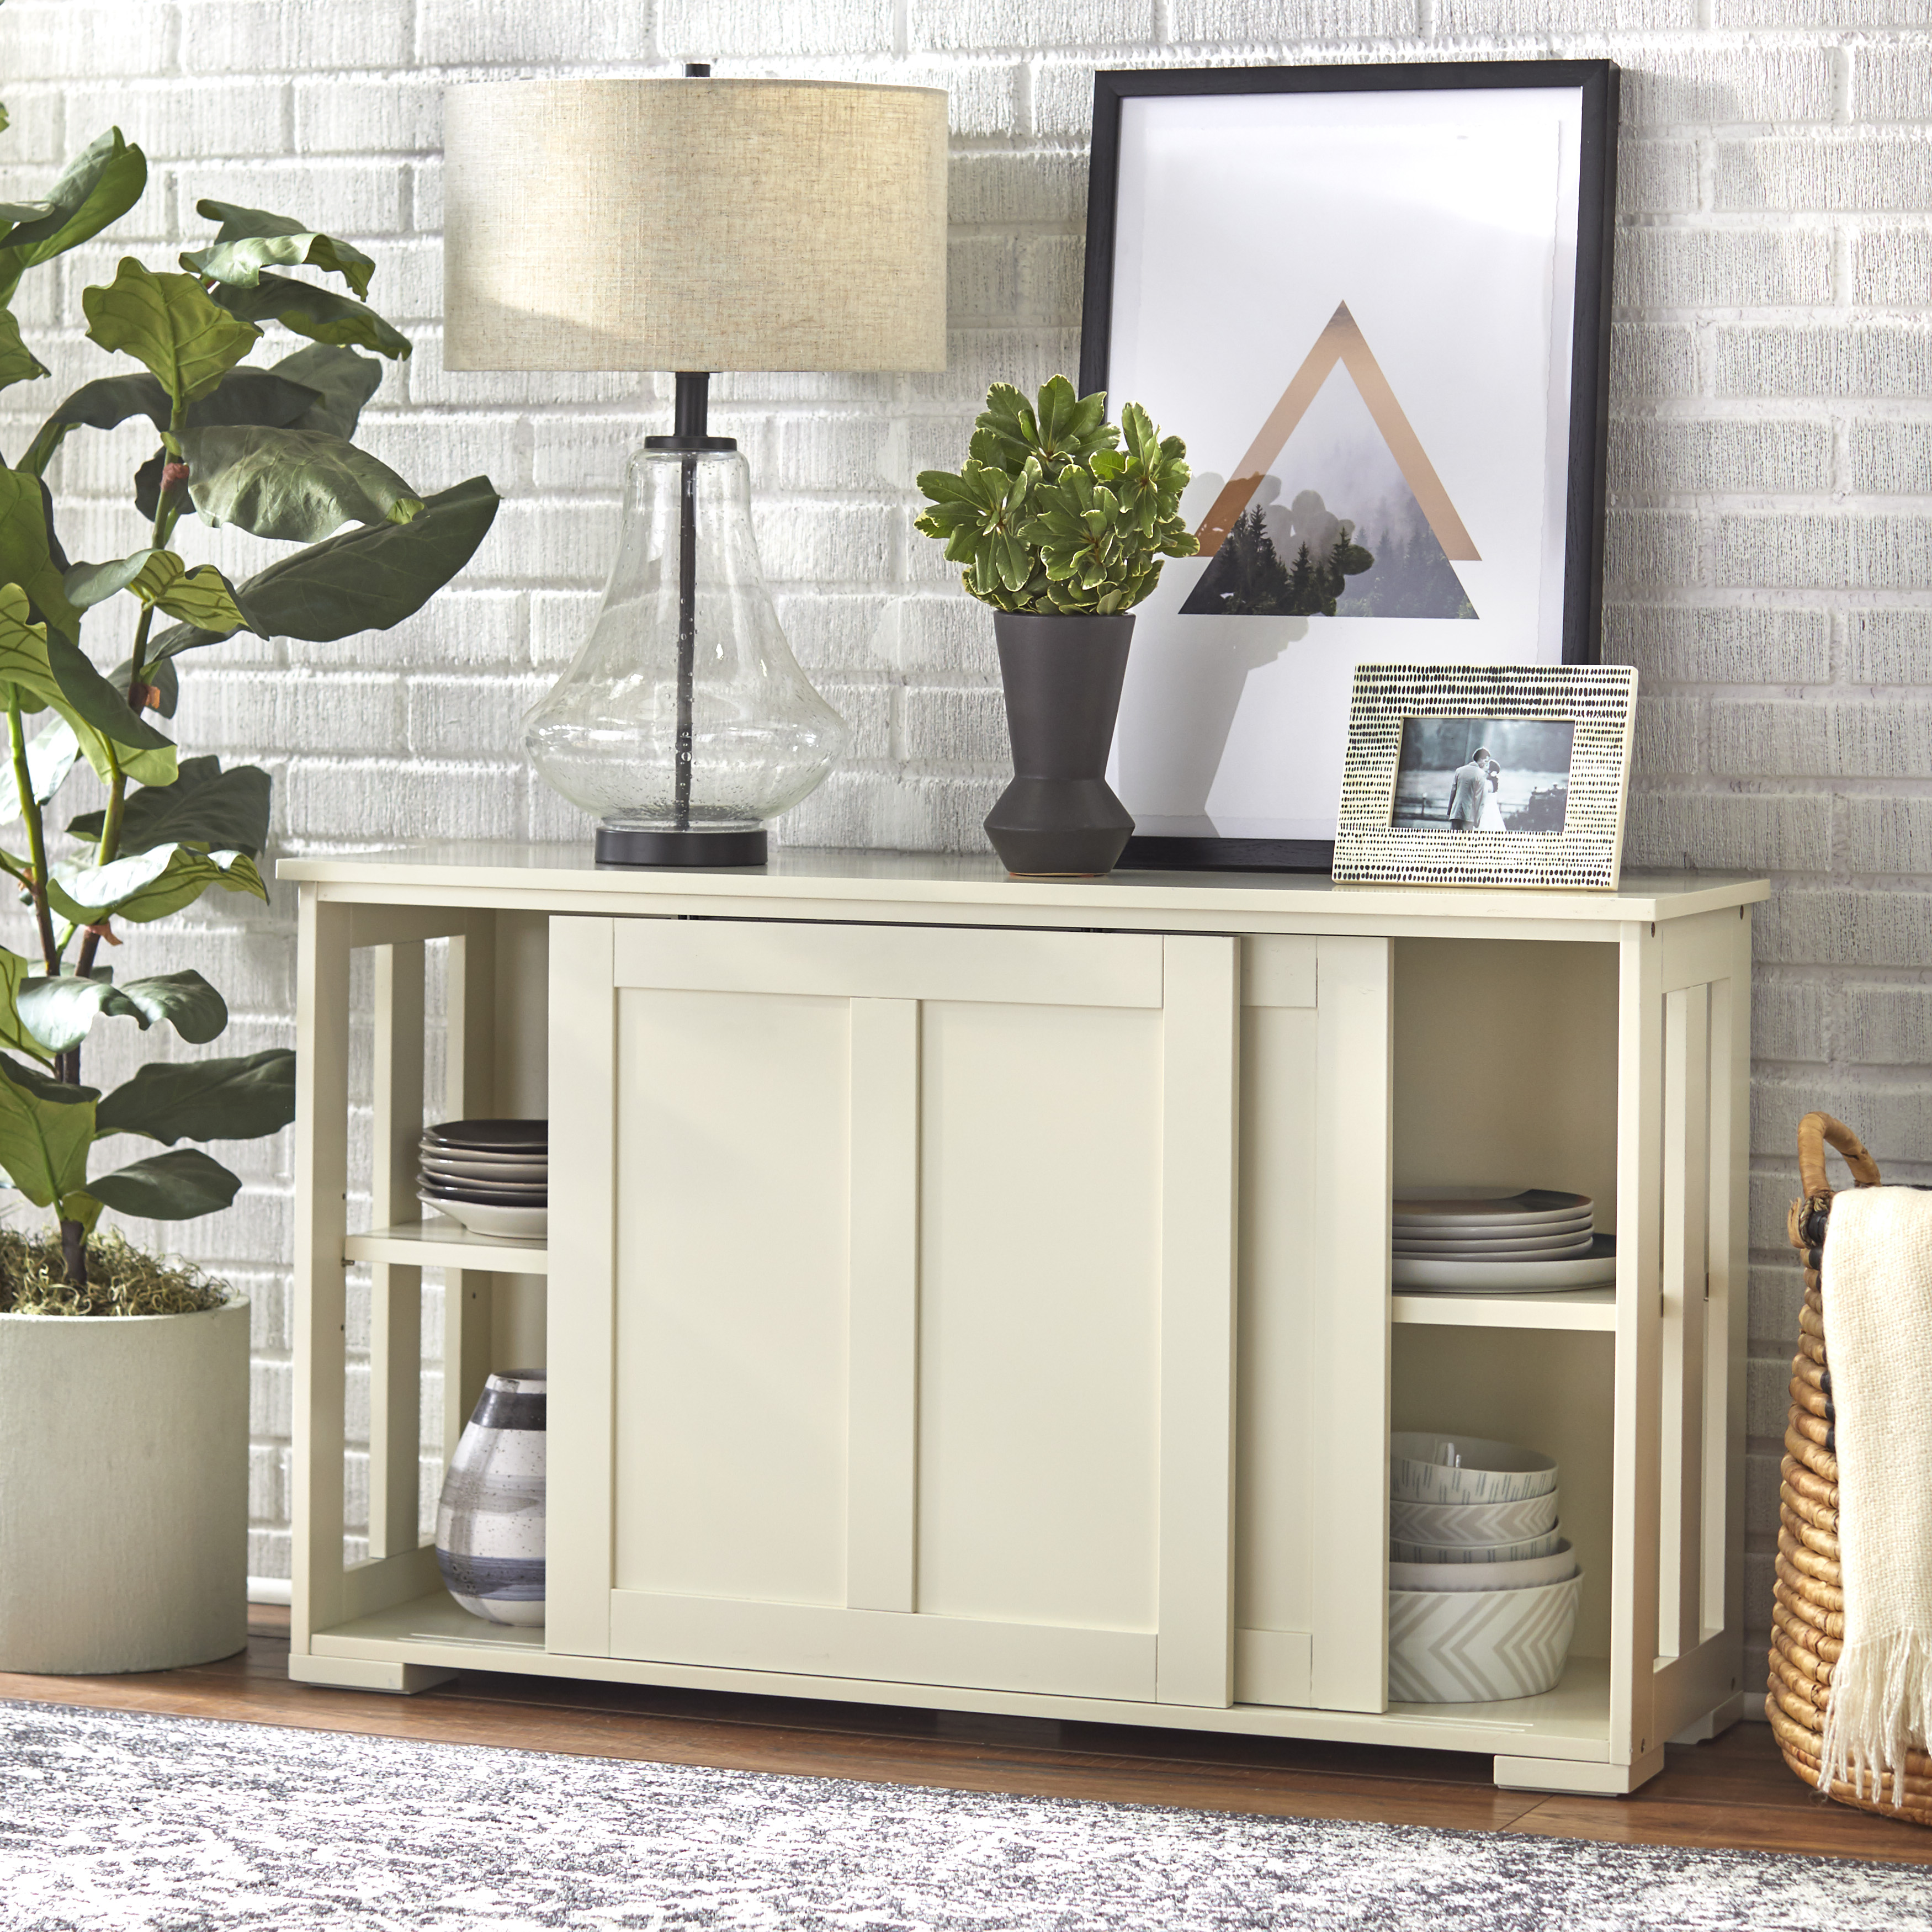 Pacific Stackable Cabinet - image 1 of 7